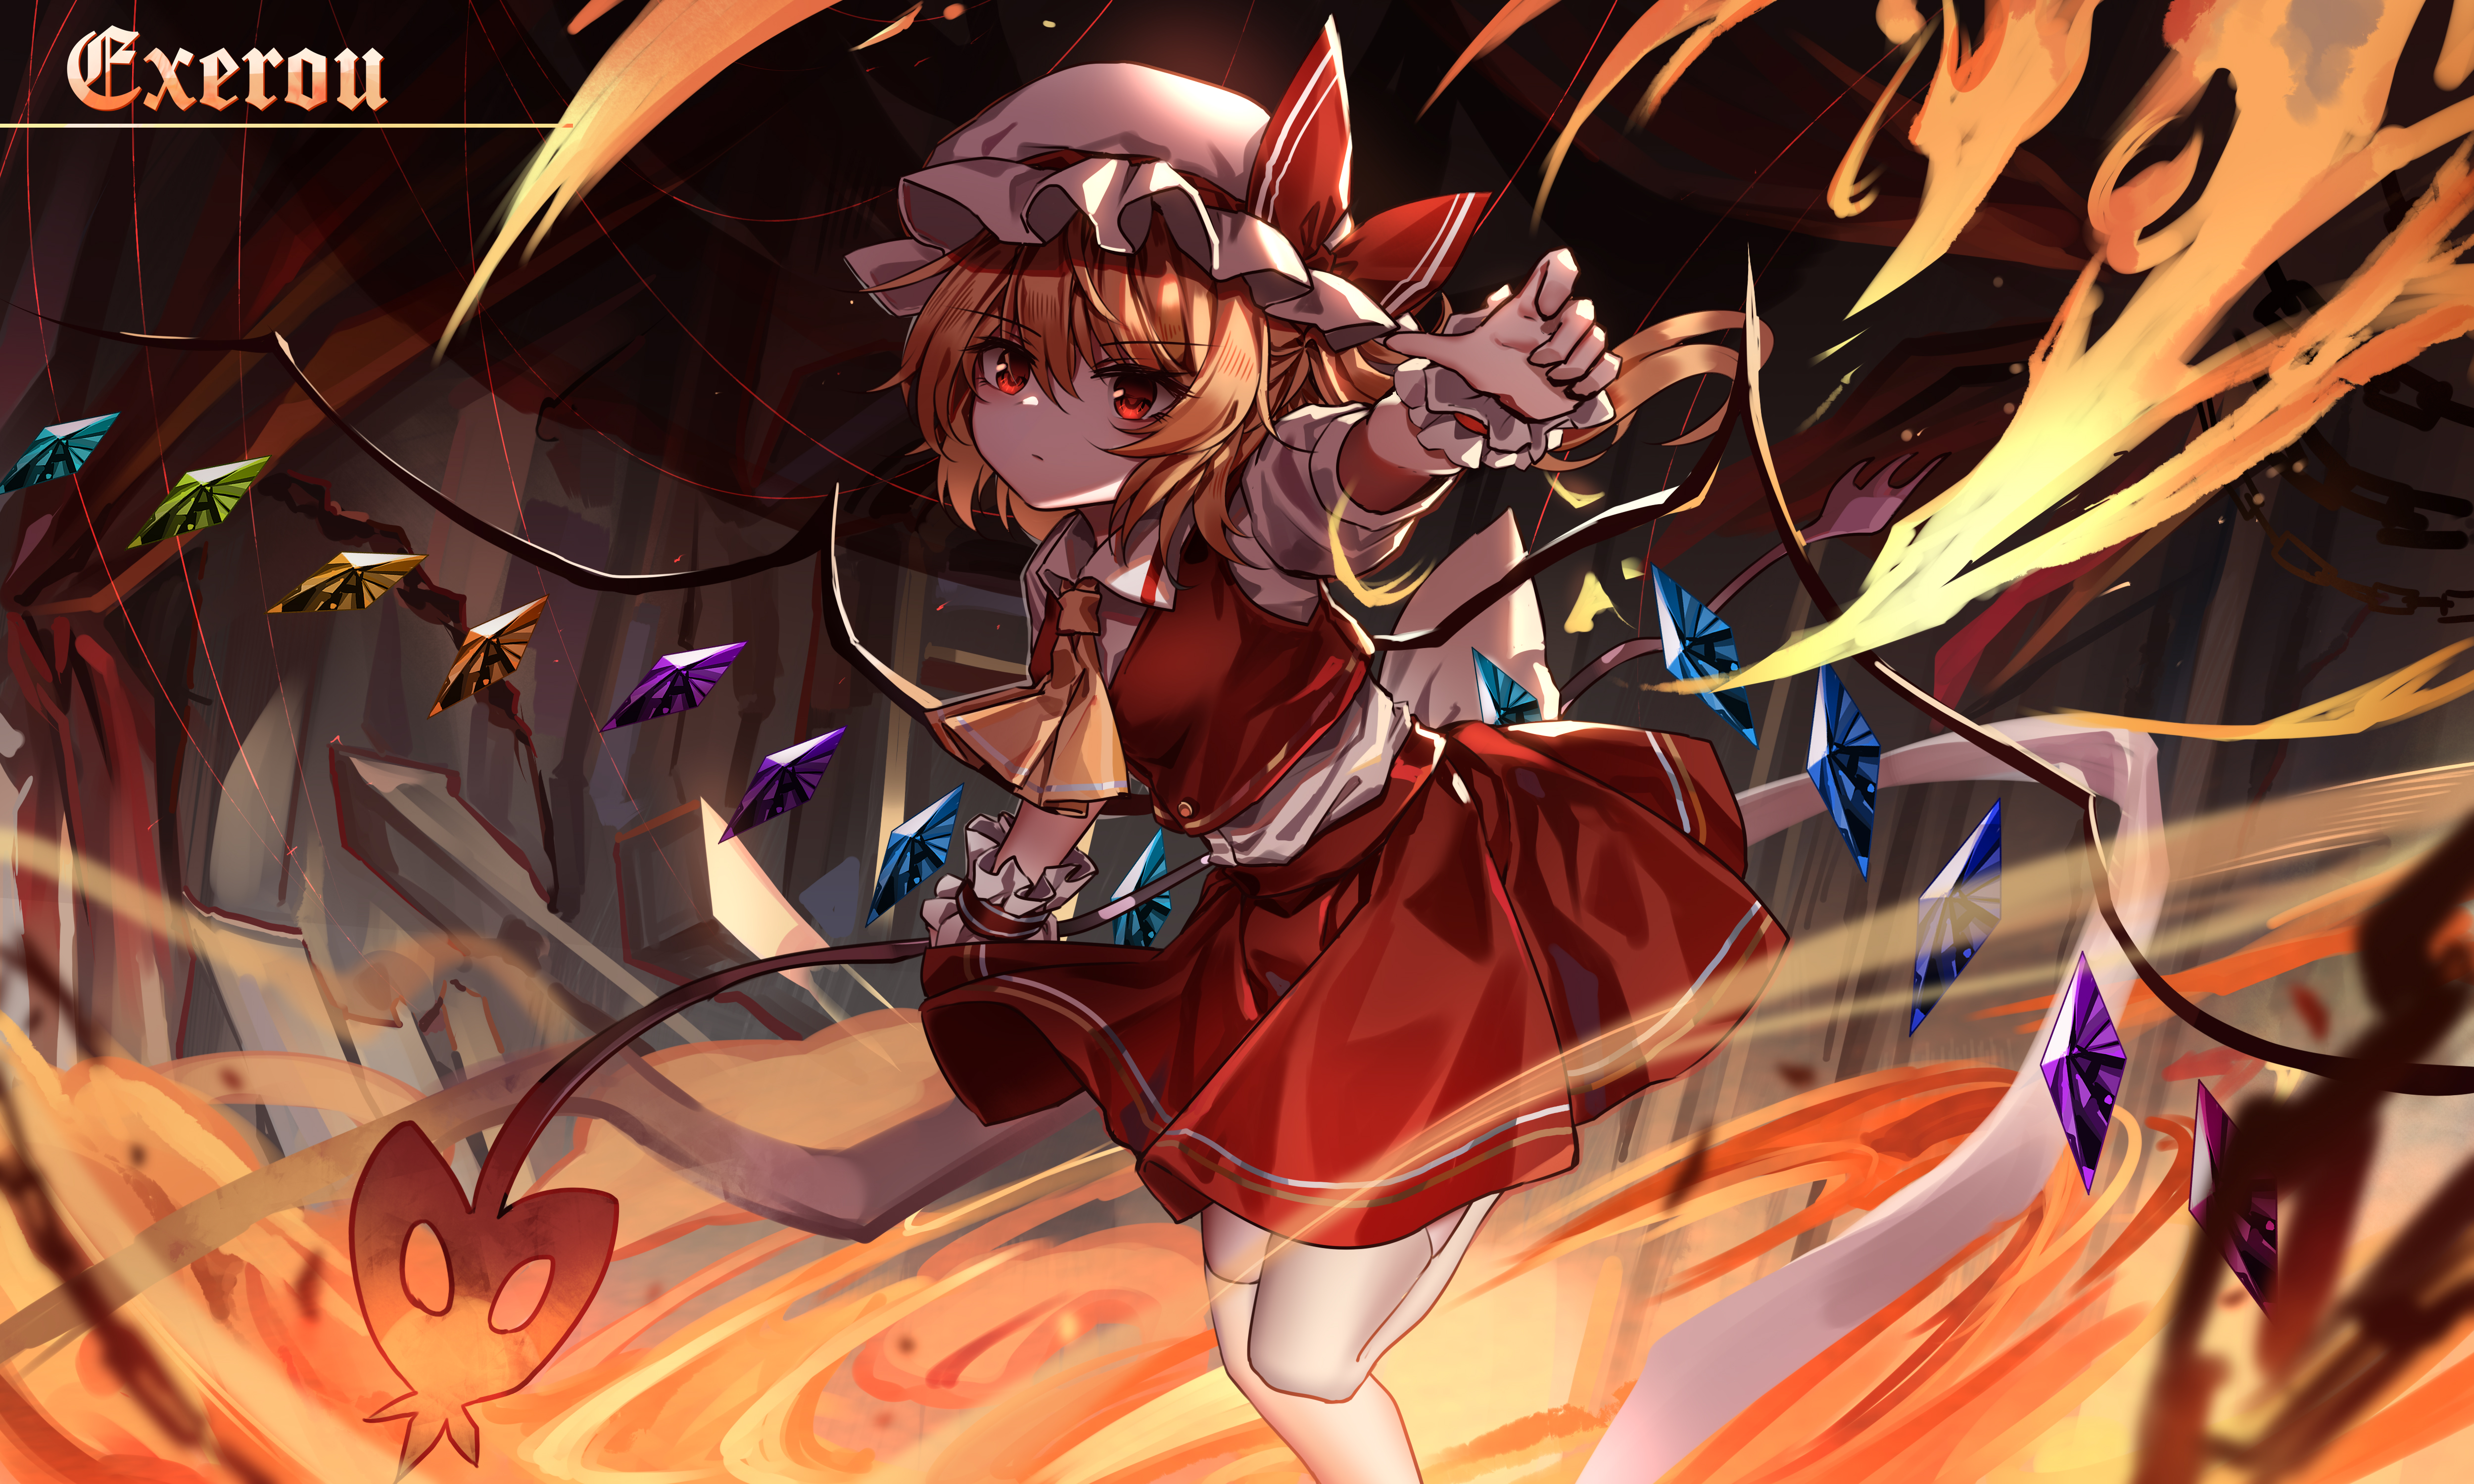 Flandre Scarlet by TOP-Exerou